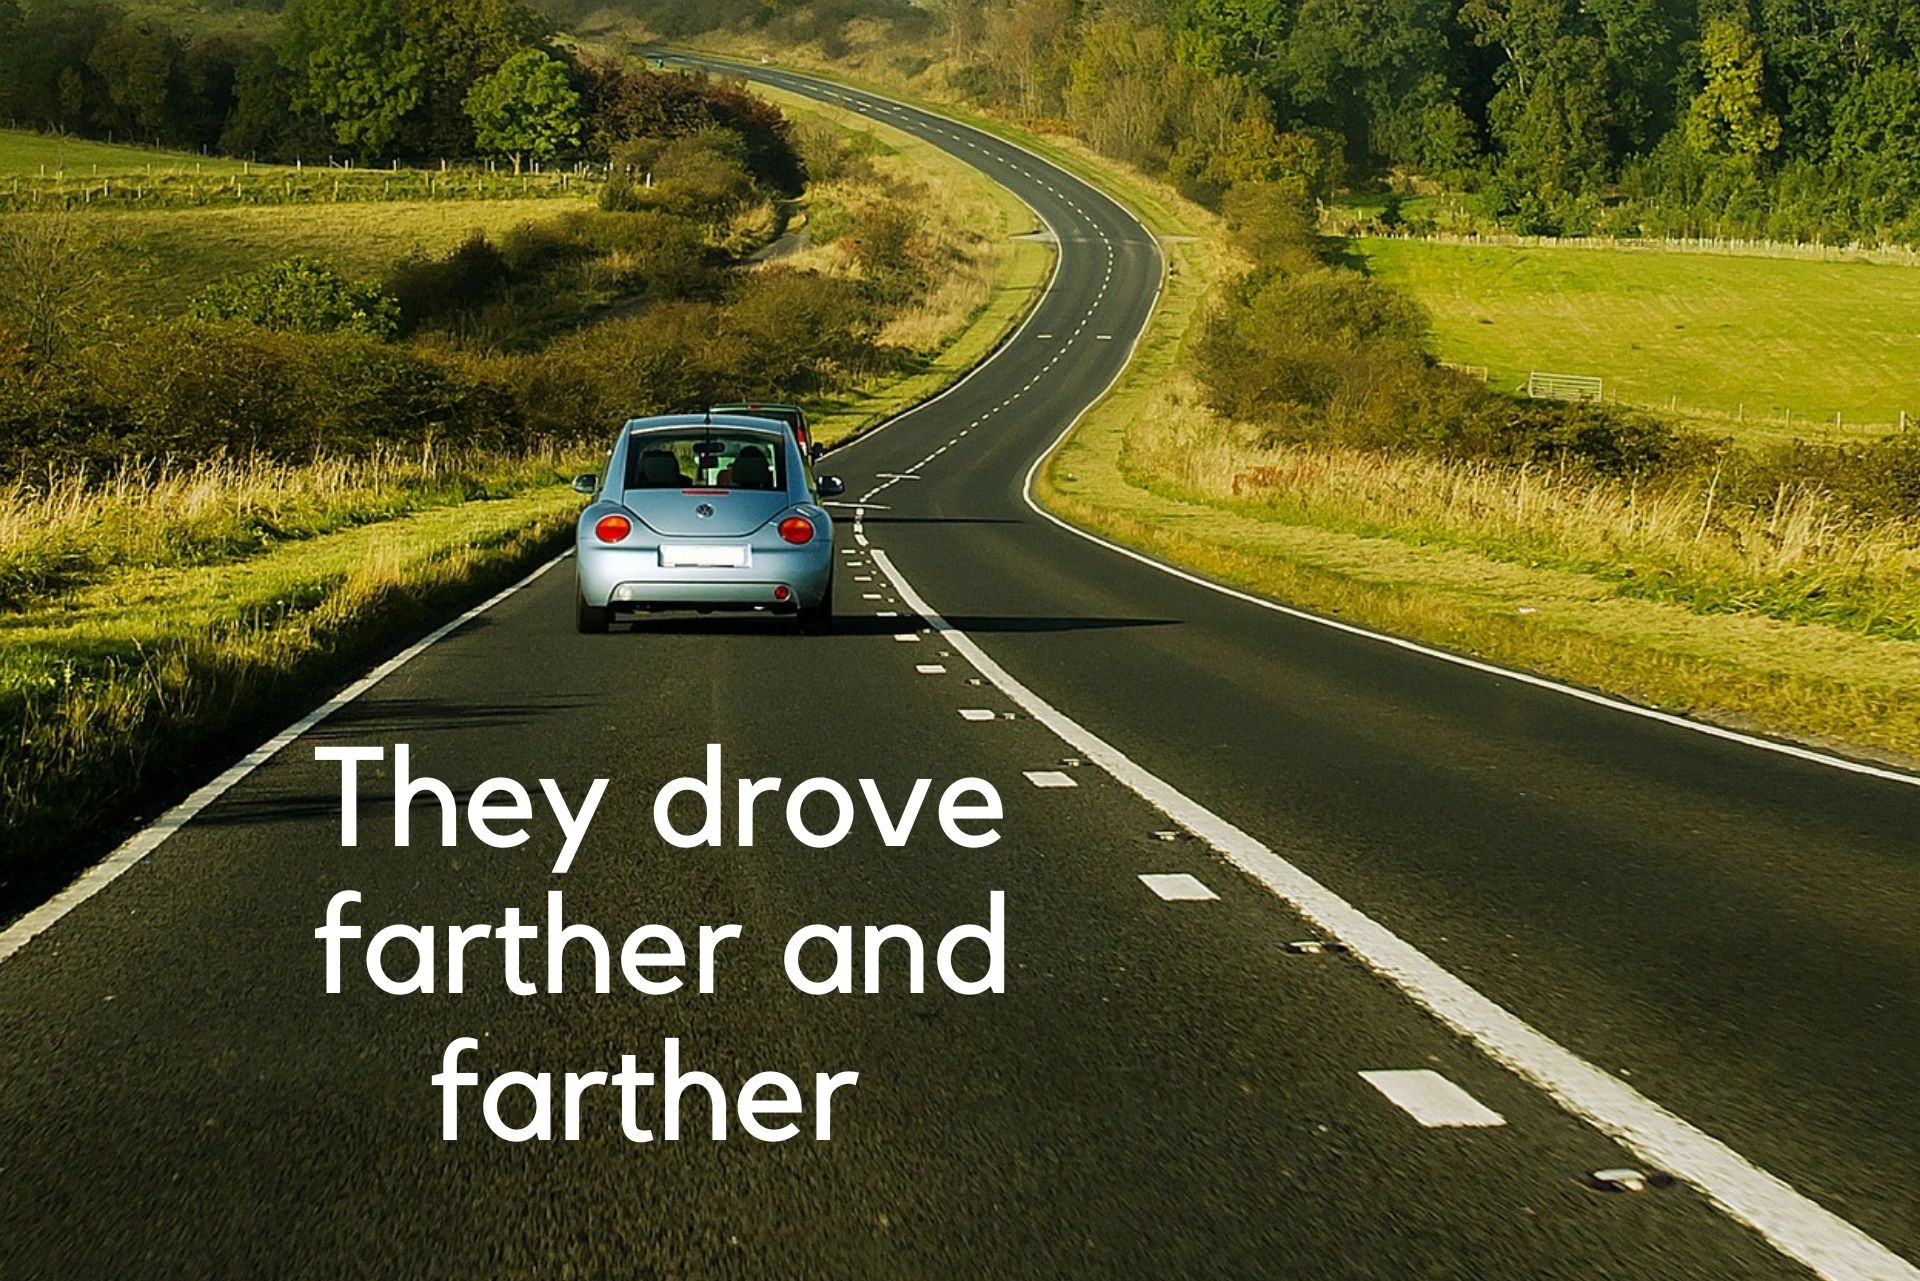 Explaining farther vs. further: car driving with caption "they drove farther and farther"